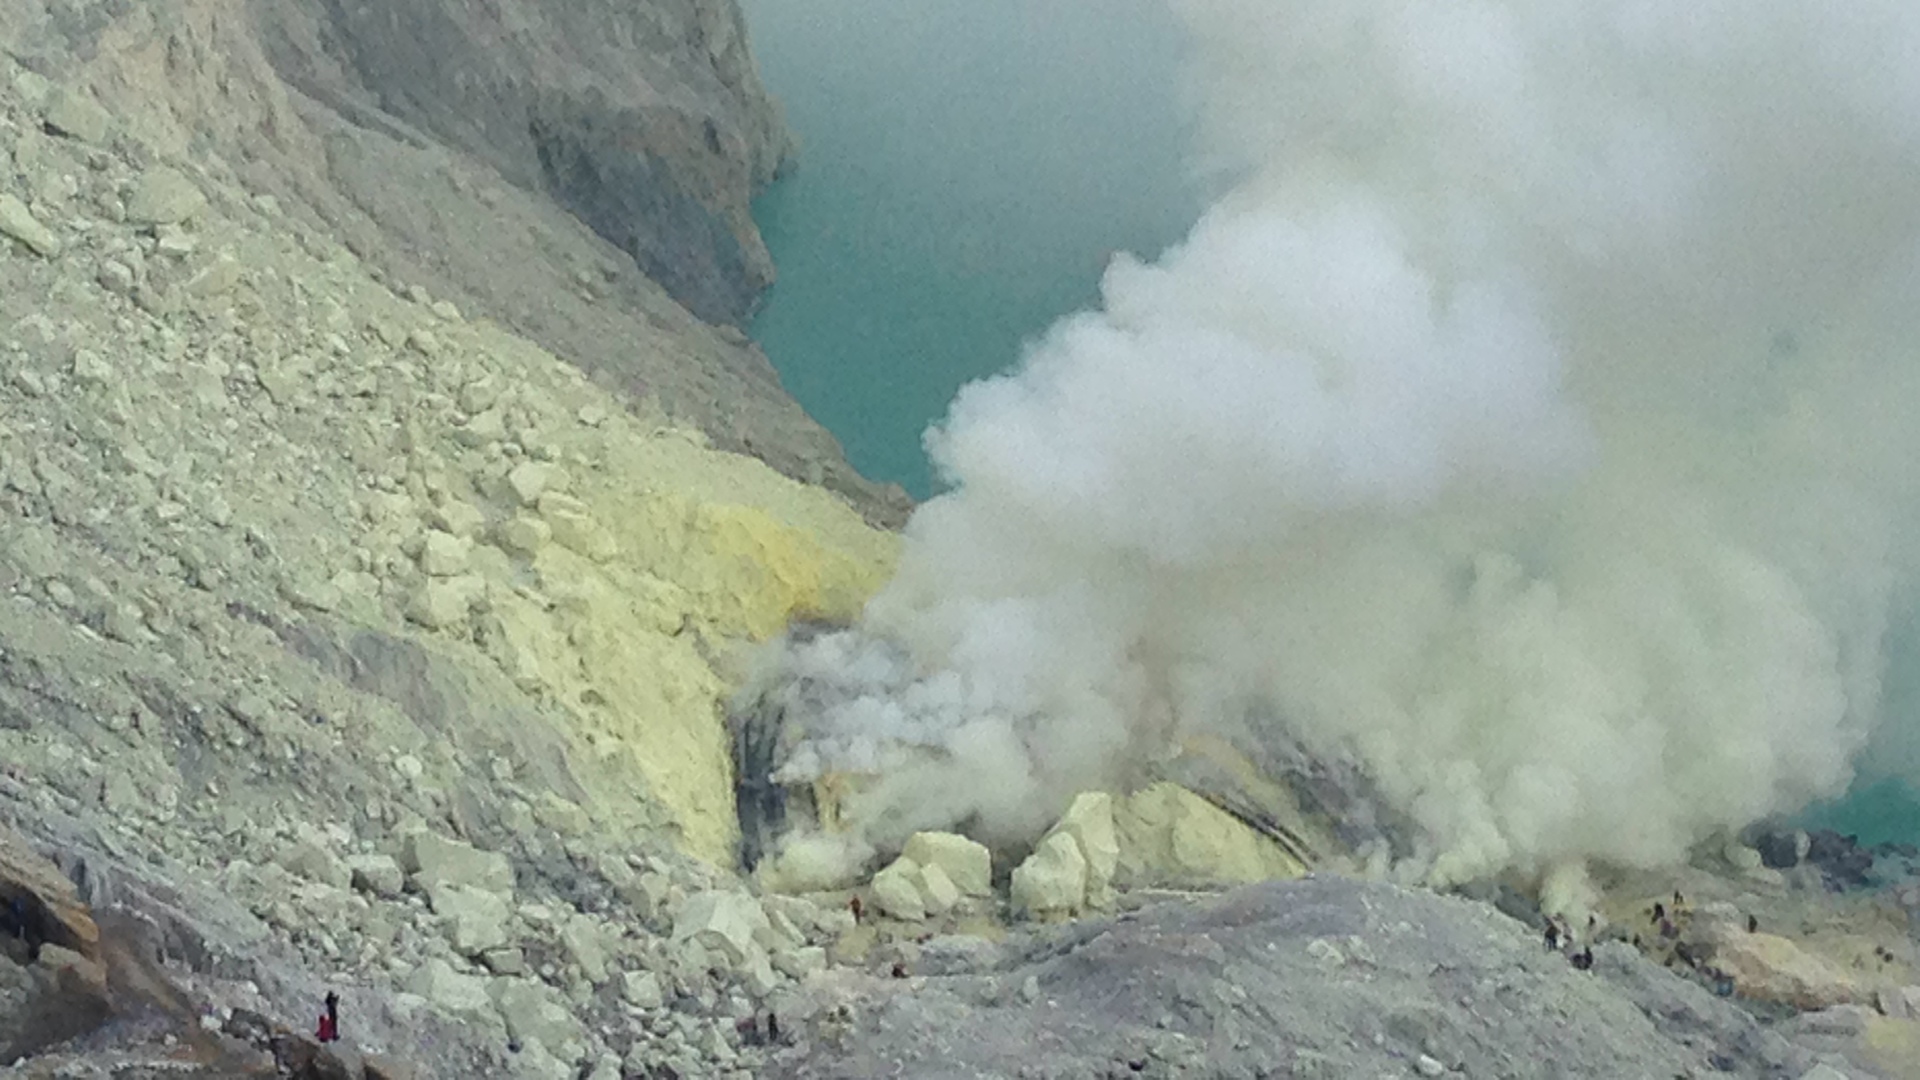 Sulphur miners dangerously close to poisonous volcanic gases at Ijen